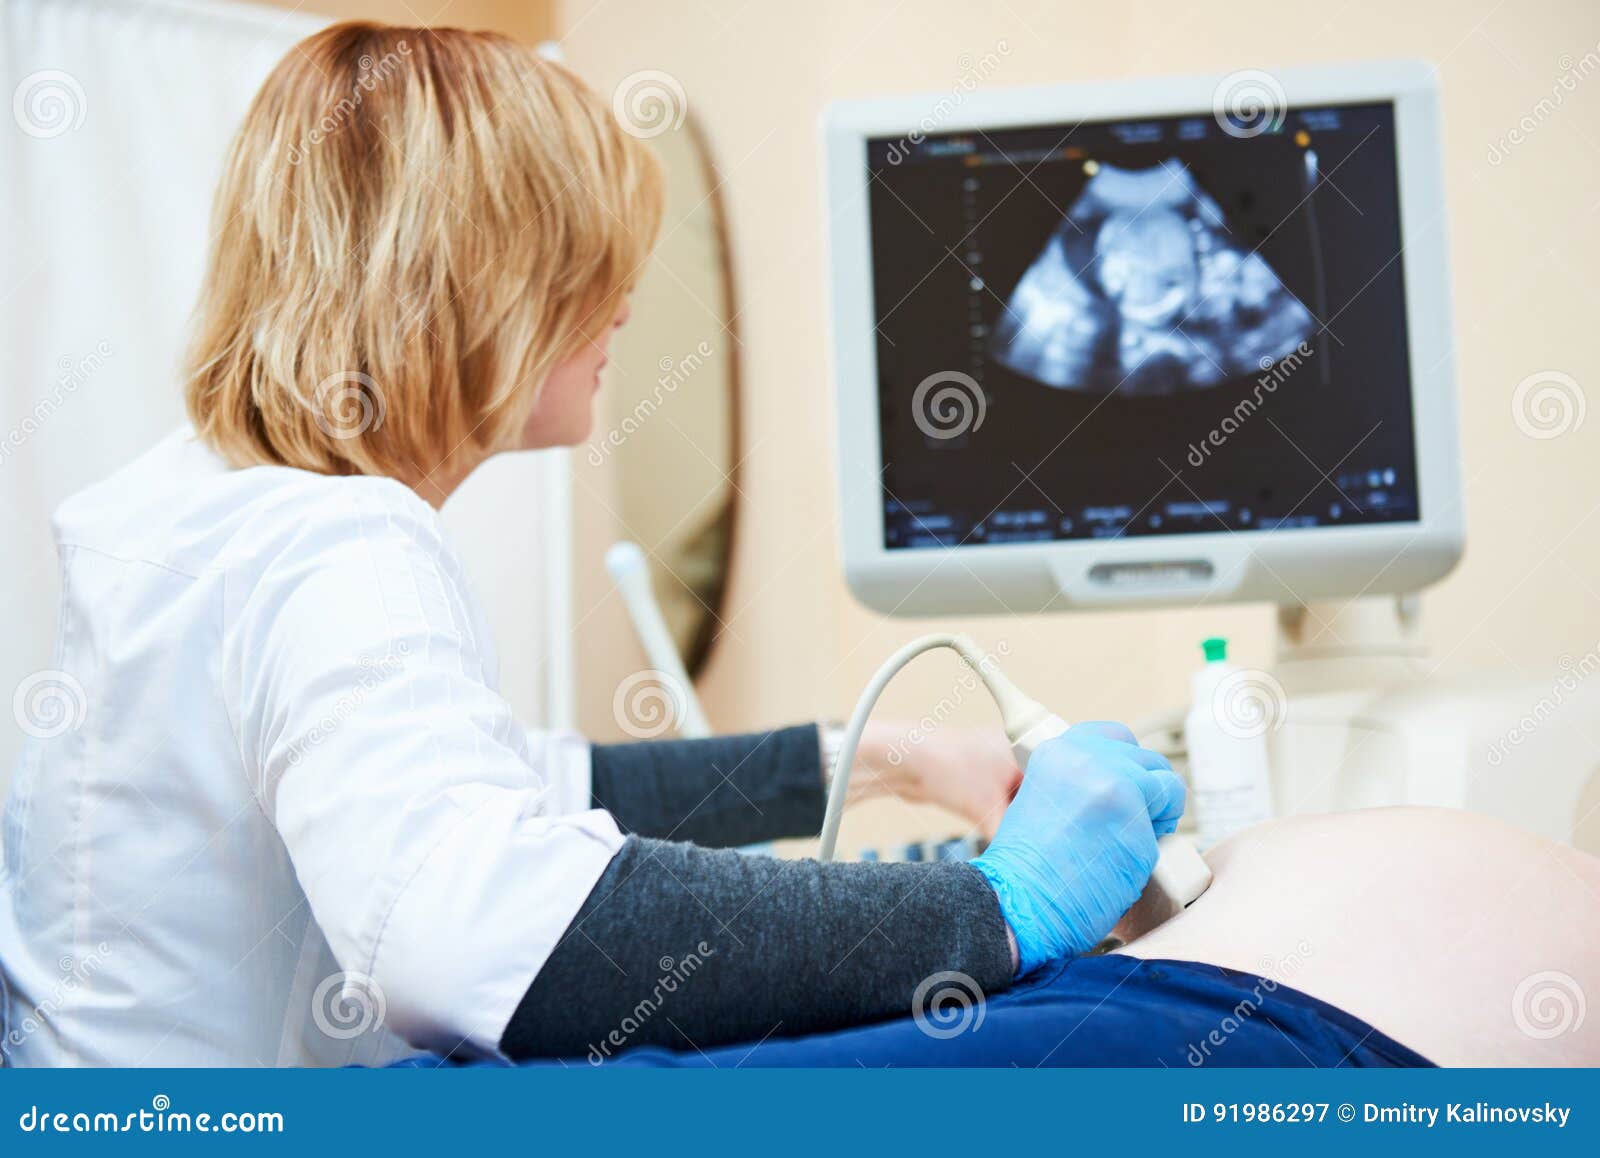 ultrasound test. pregnancy. gynecologist checking fetal life with scanner.